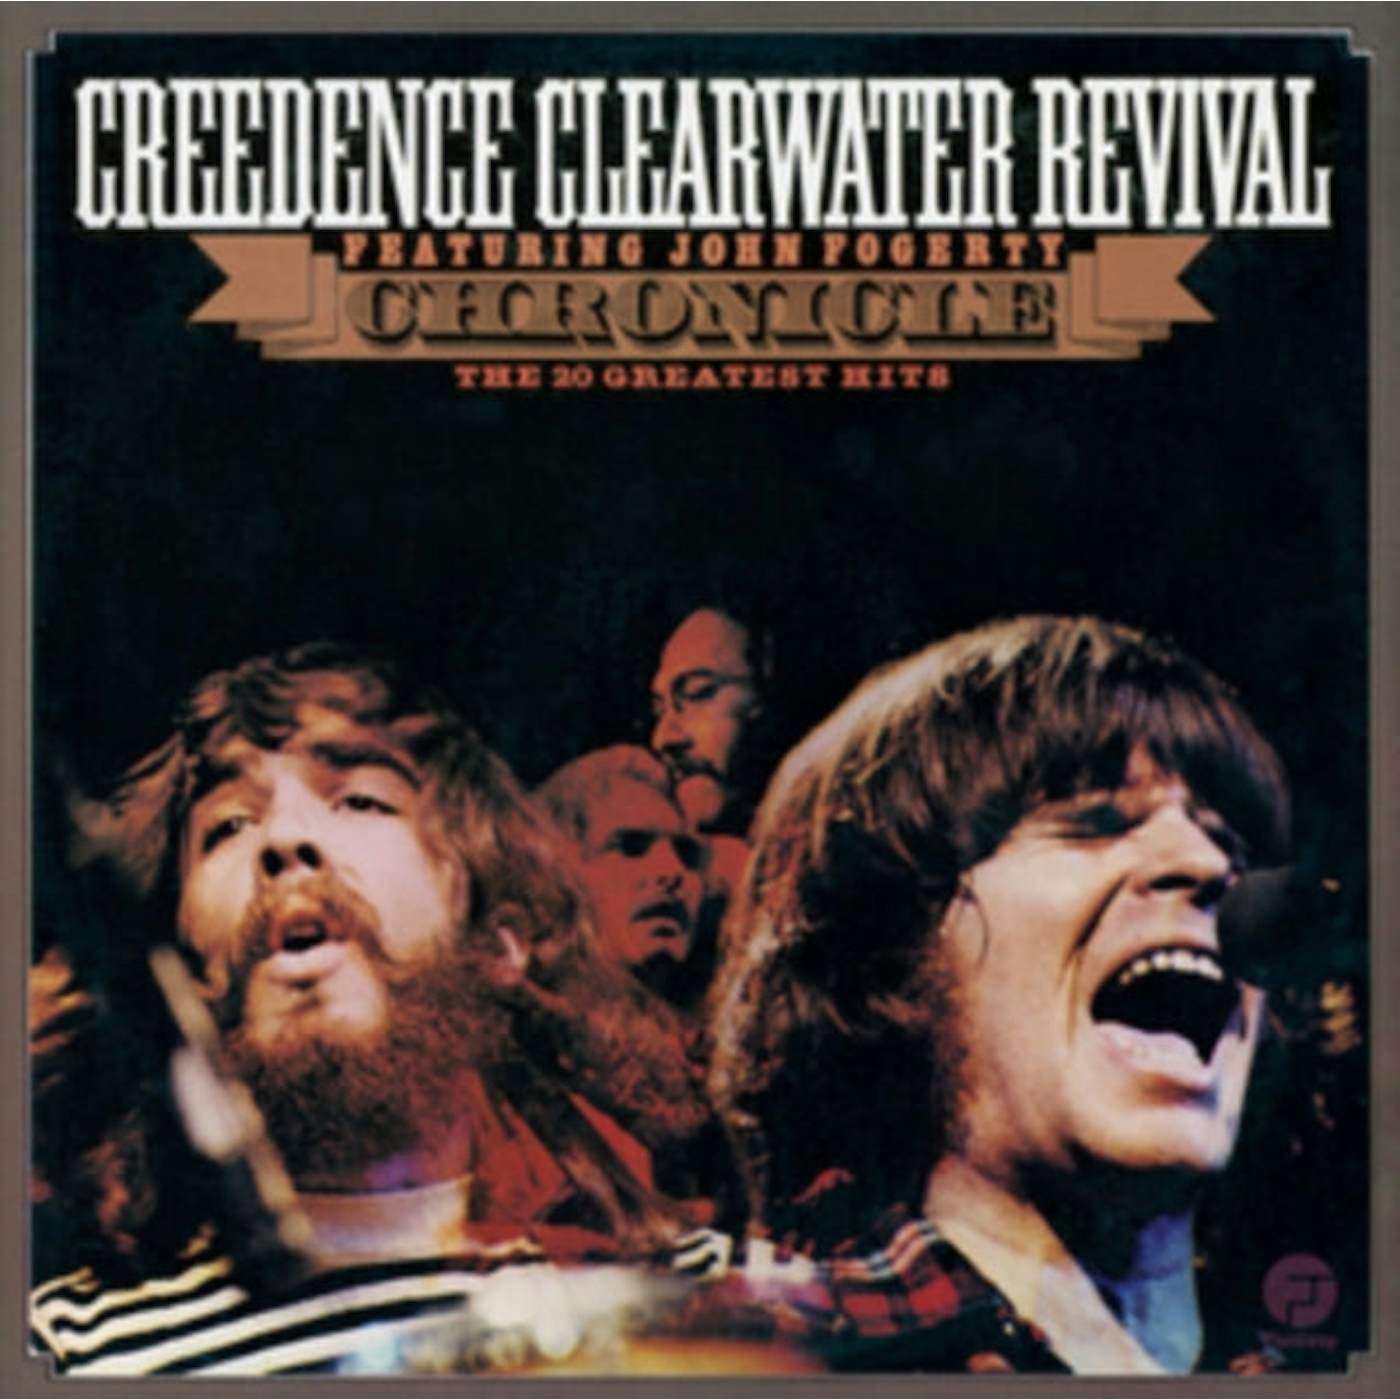 Creedence Clearwater Revival LP Vinyl Record - Chronicle: The 20.  Greatest Hits